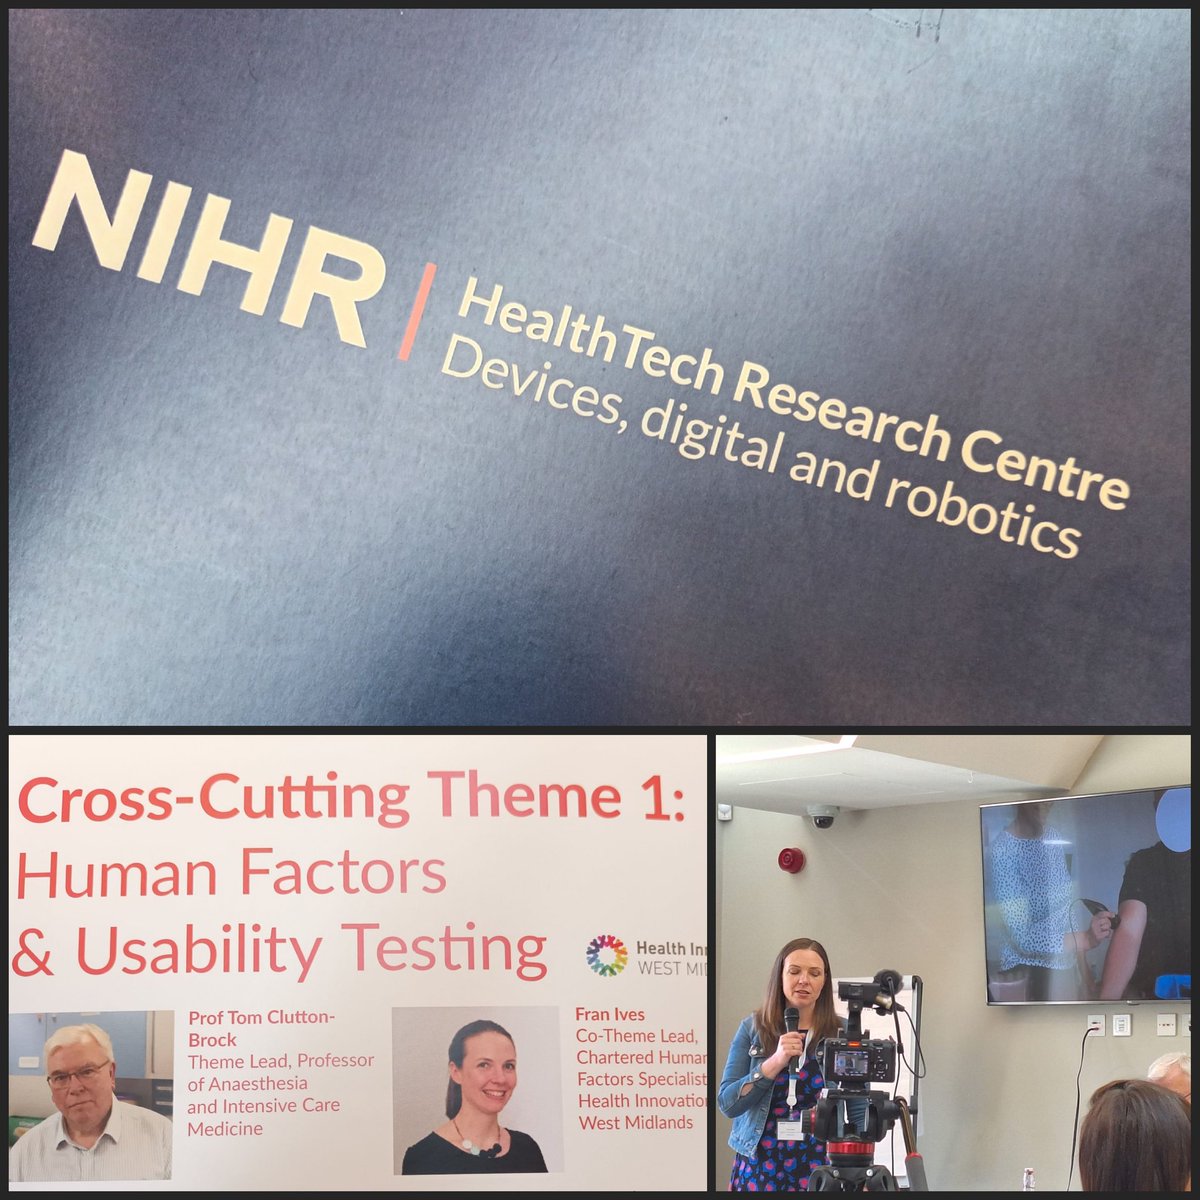 Great to be at the NIHR HealthTech Research Centre Devices, digital and robotics launch today. @HealthInnovWM is a co-theme lead for Human Factors and Usability Testing. Exciting times ahead!